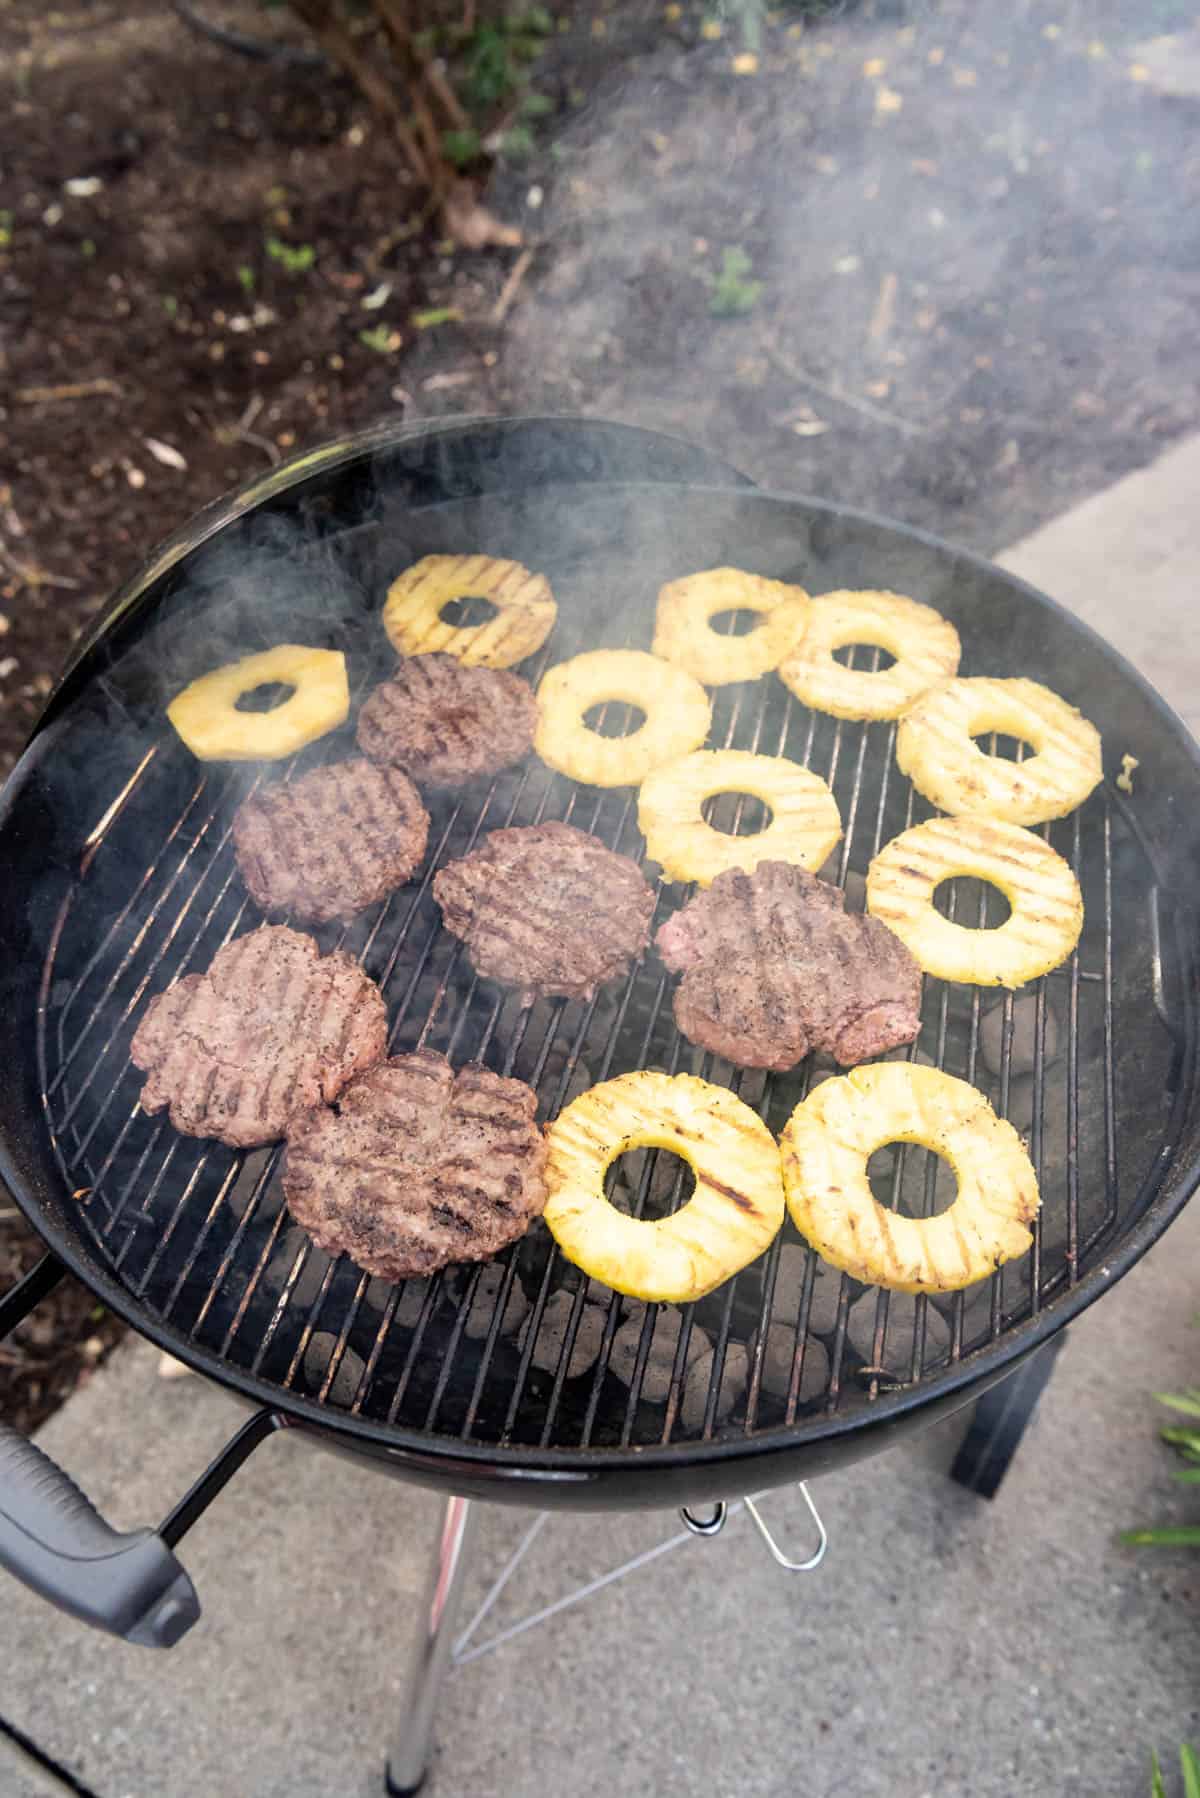 Grilling burgers and pineapple rings on a charcoal grill.